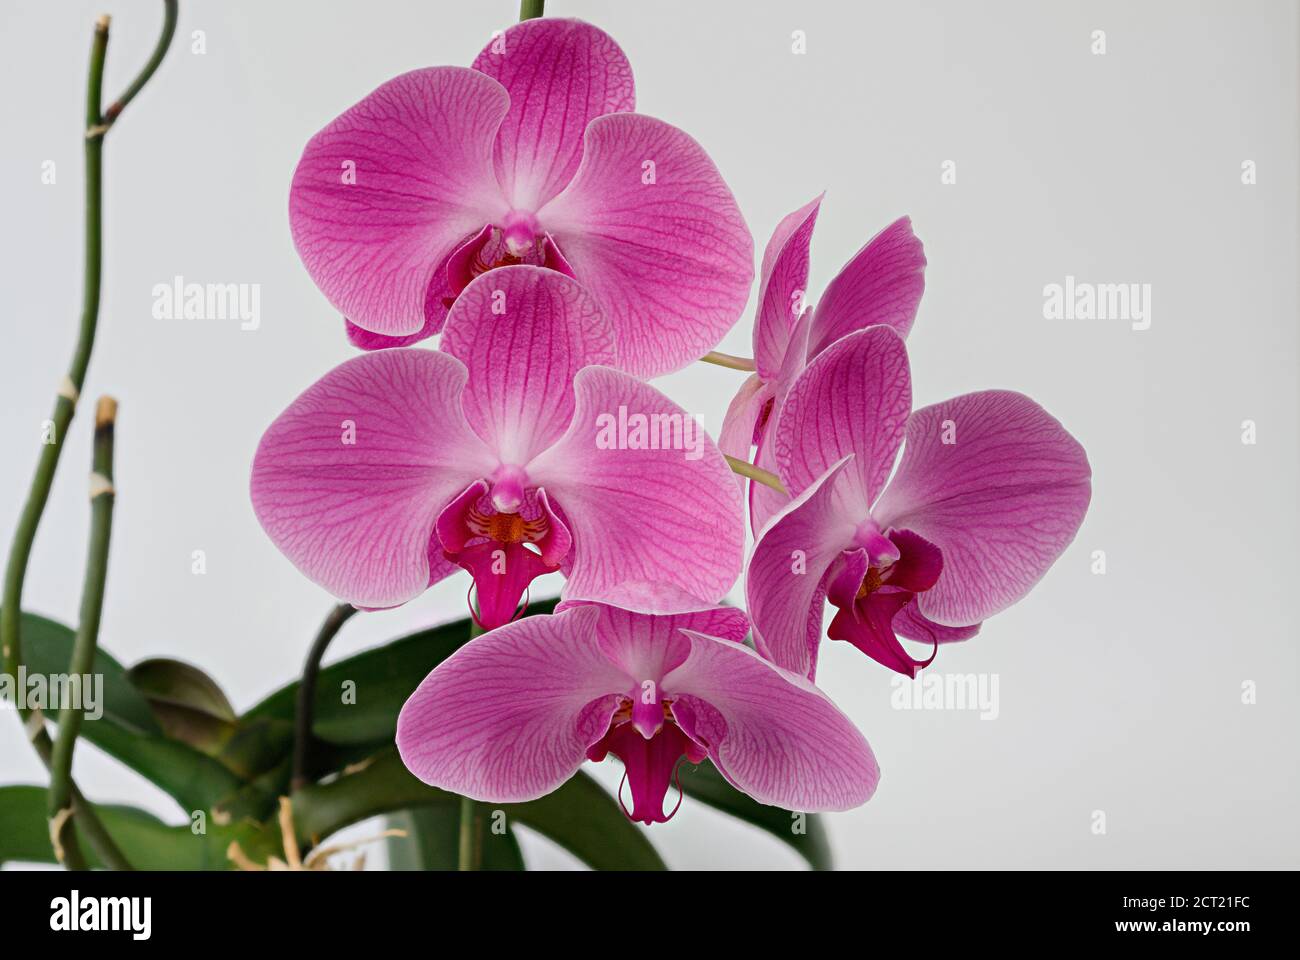 A Phalaenopsis orchid against a bright background, photographed close up, in full bloom Stock Photo